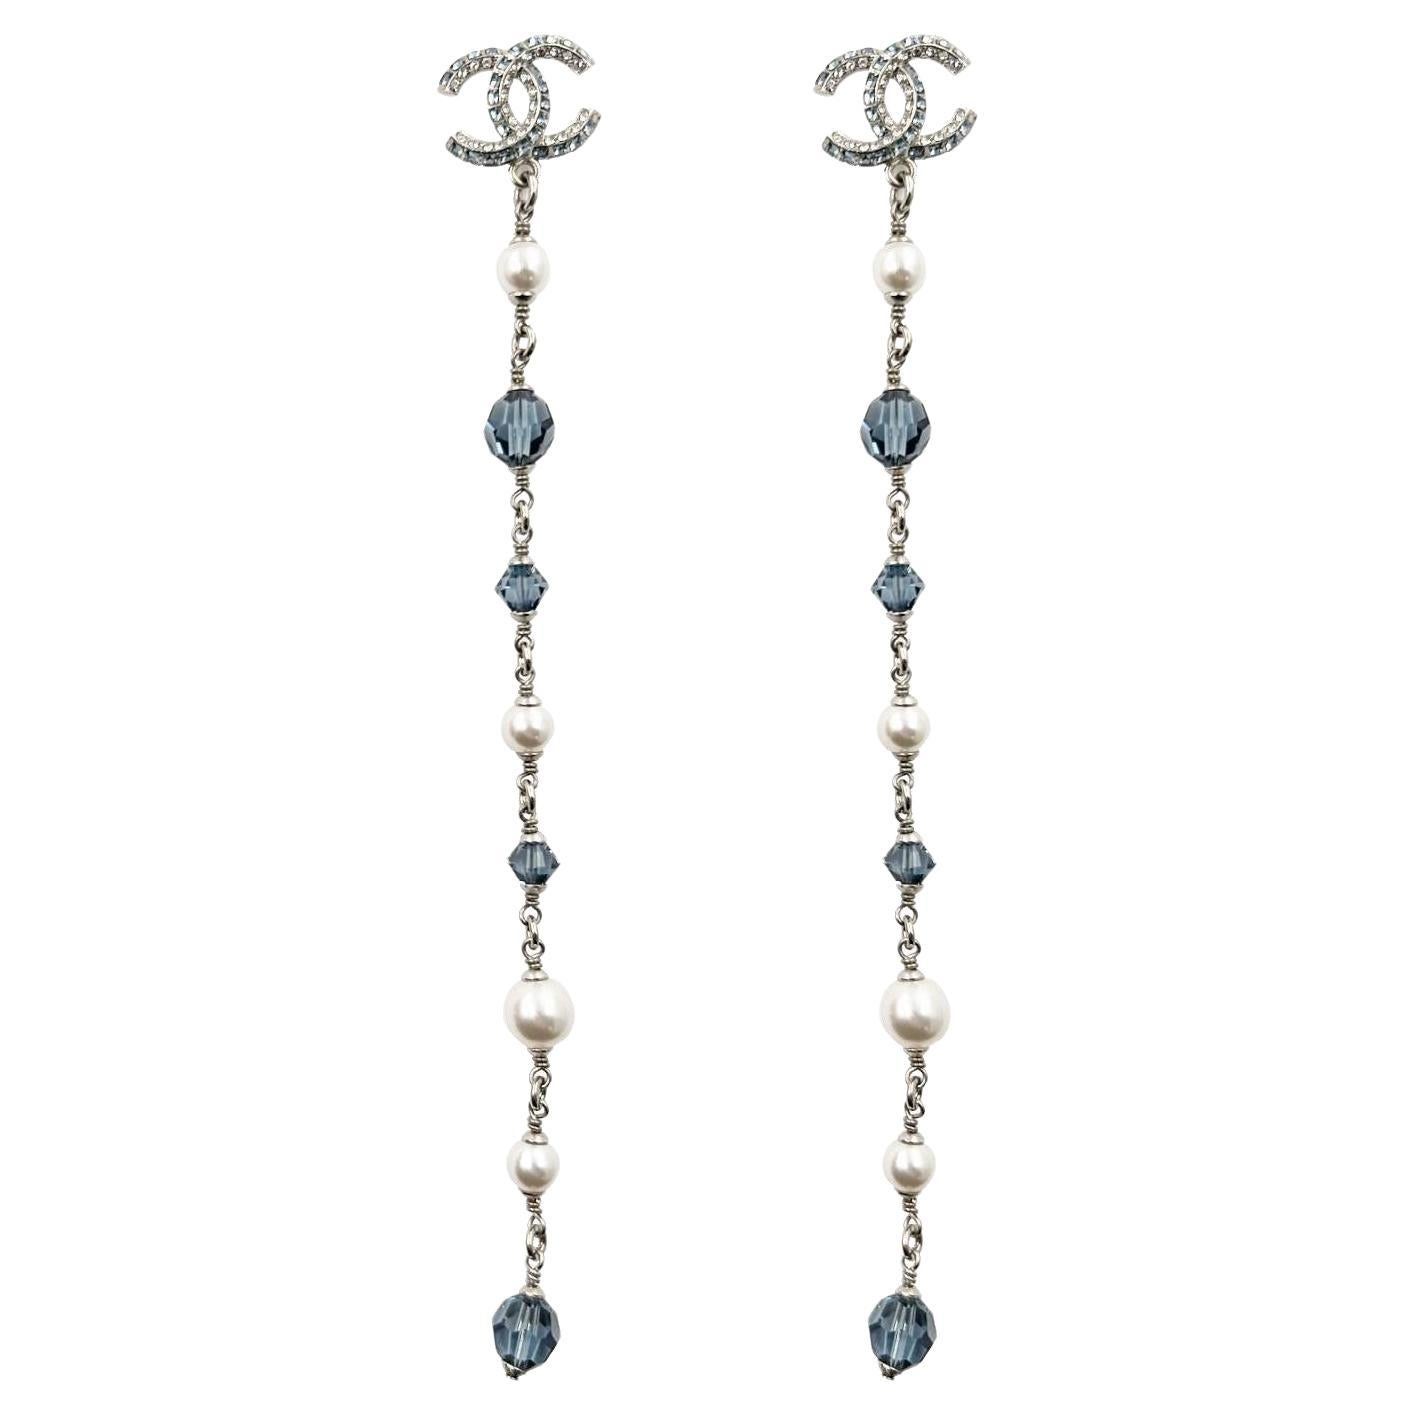 Chanel Brand New Silver CC Blue Princess Crystal Pearl Super Long Earrings